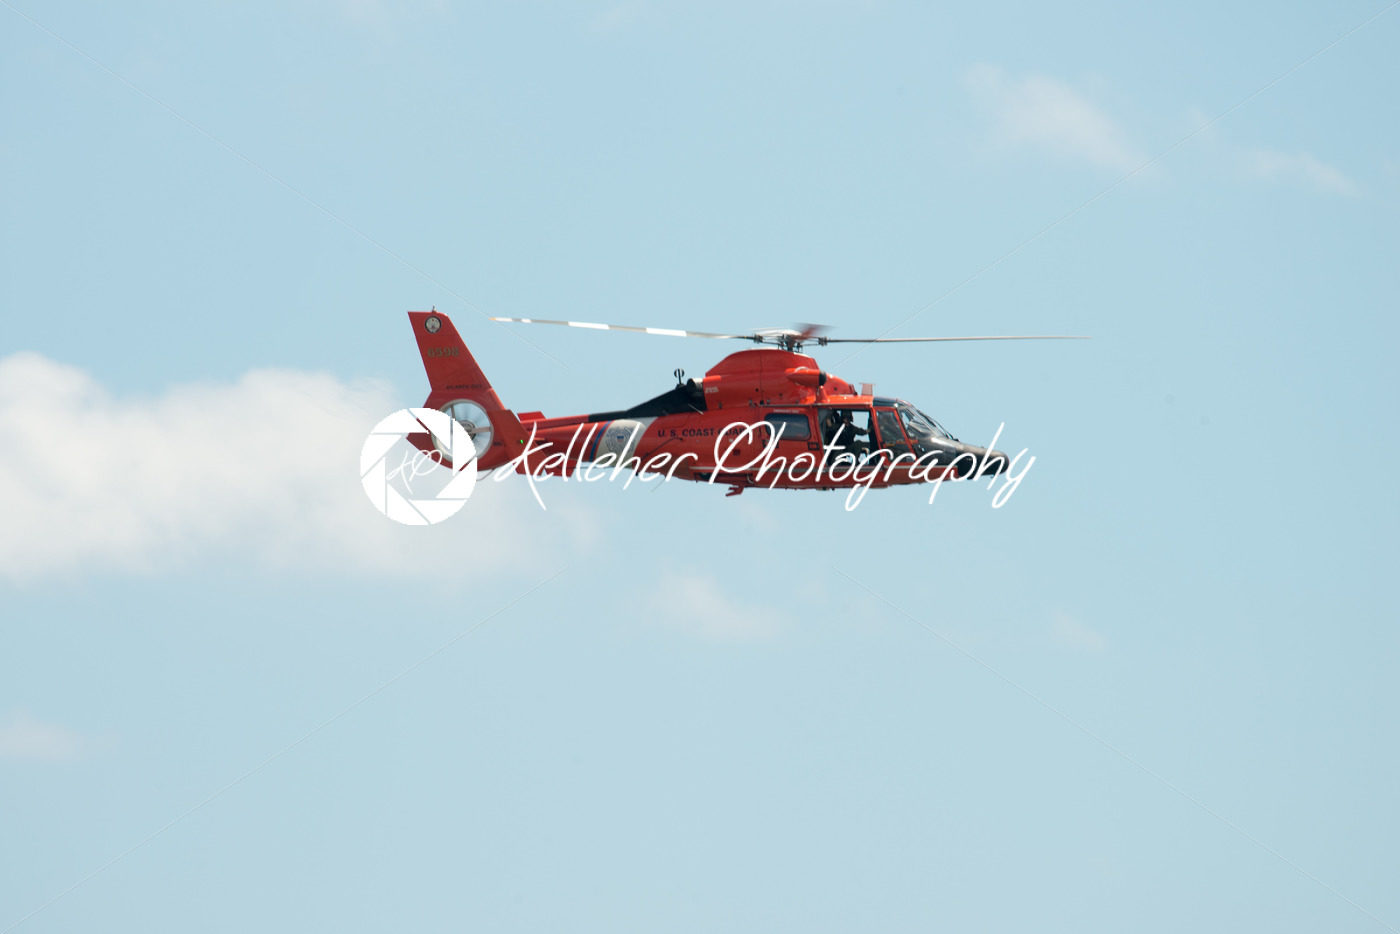 ATLANTIC CITY, NJ – AUGUST 17: US Coast Guard Helicopter at Annual Atlantic City Air Show on August 17, 2016 - Kelleher Photography Store